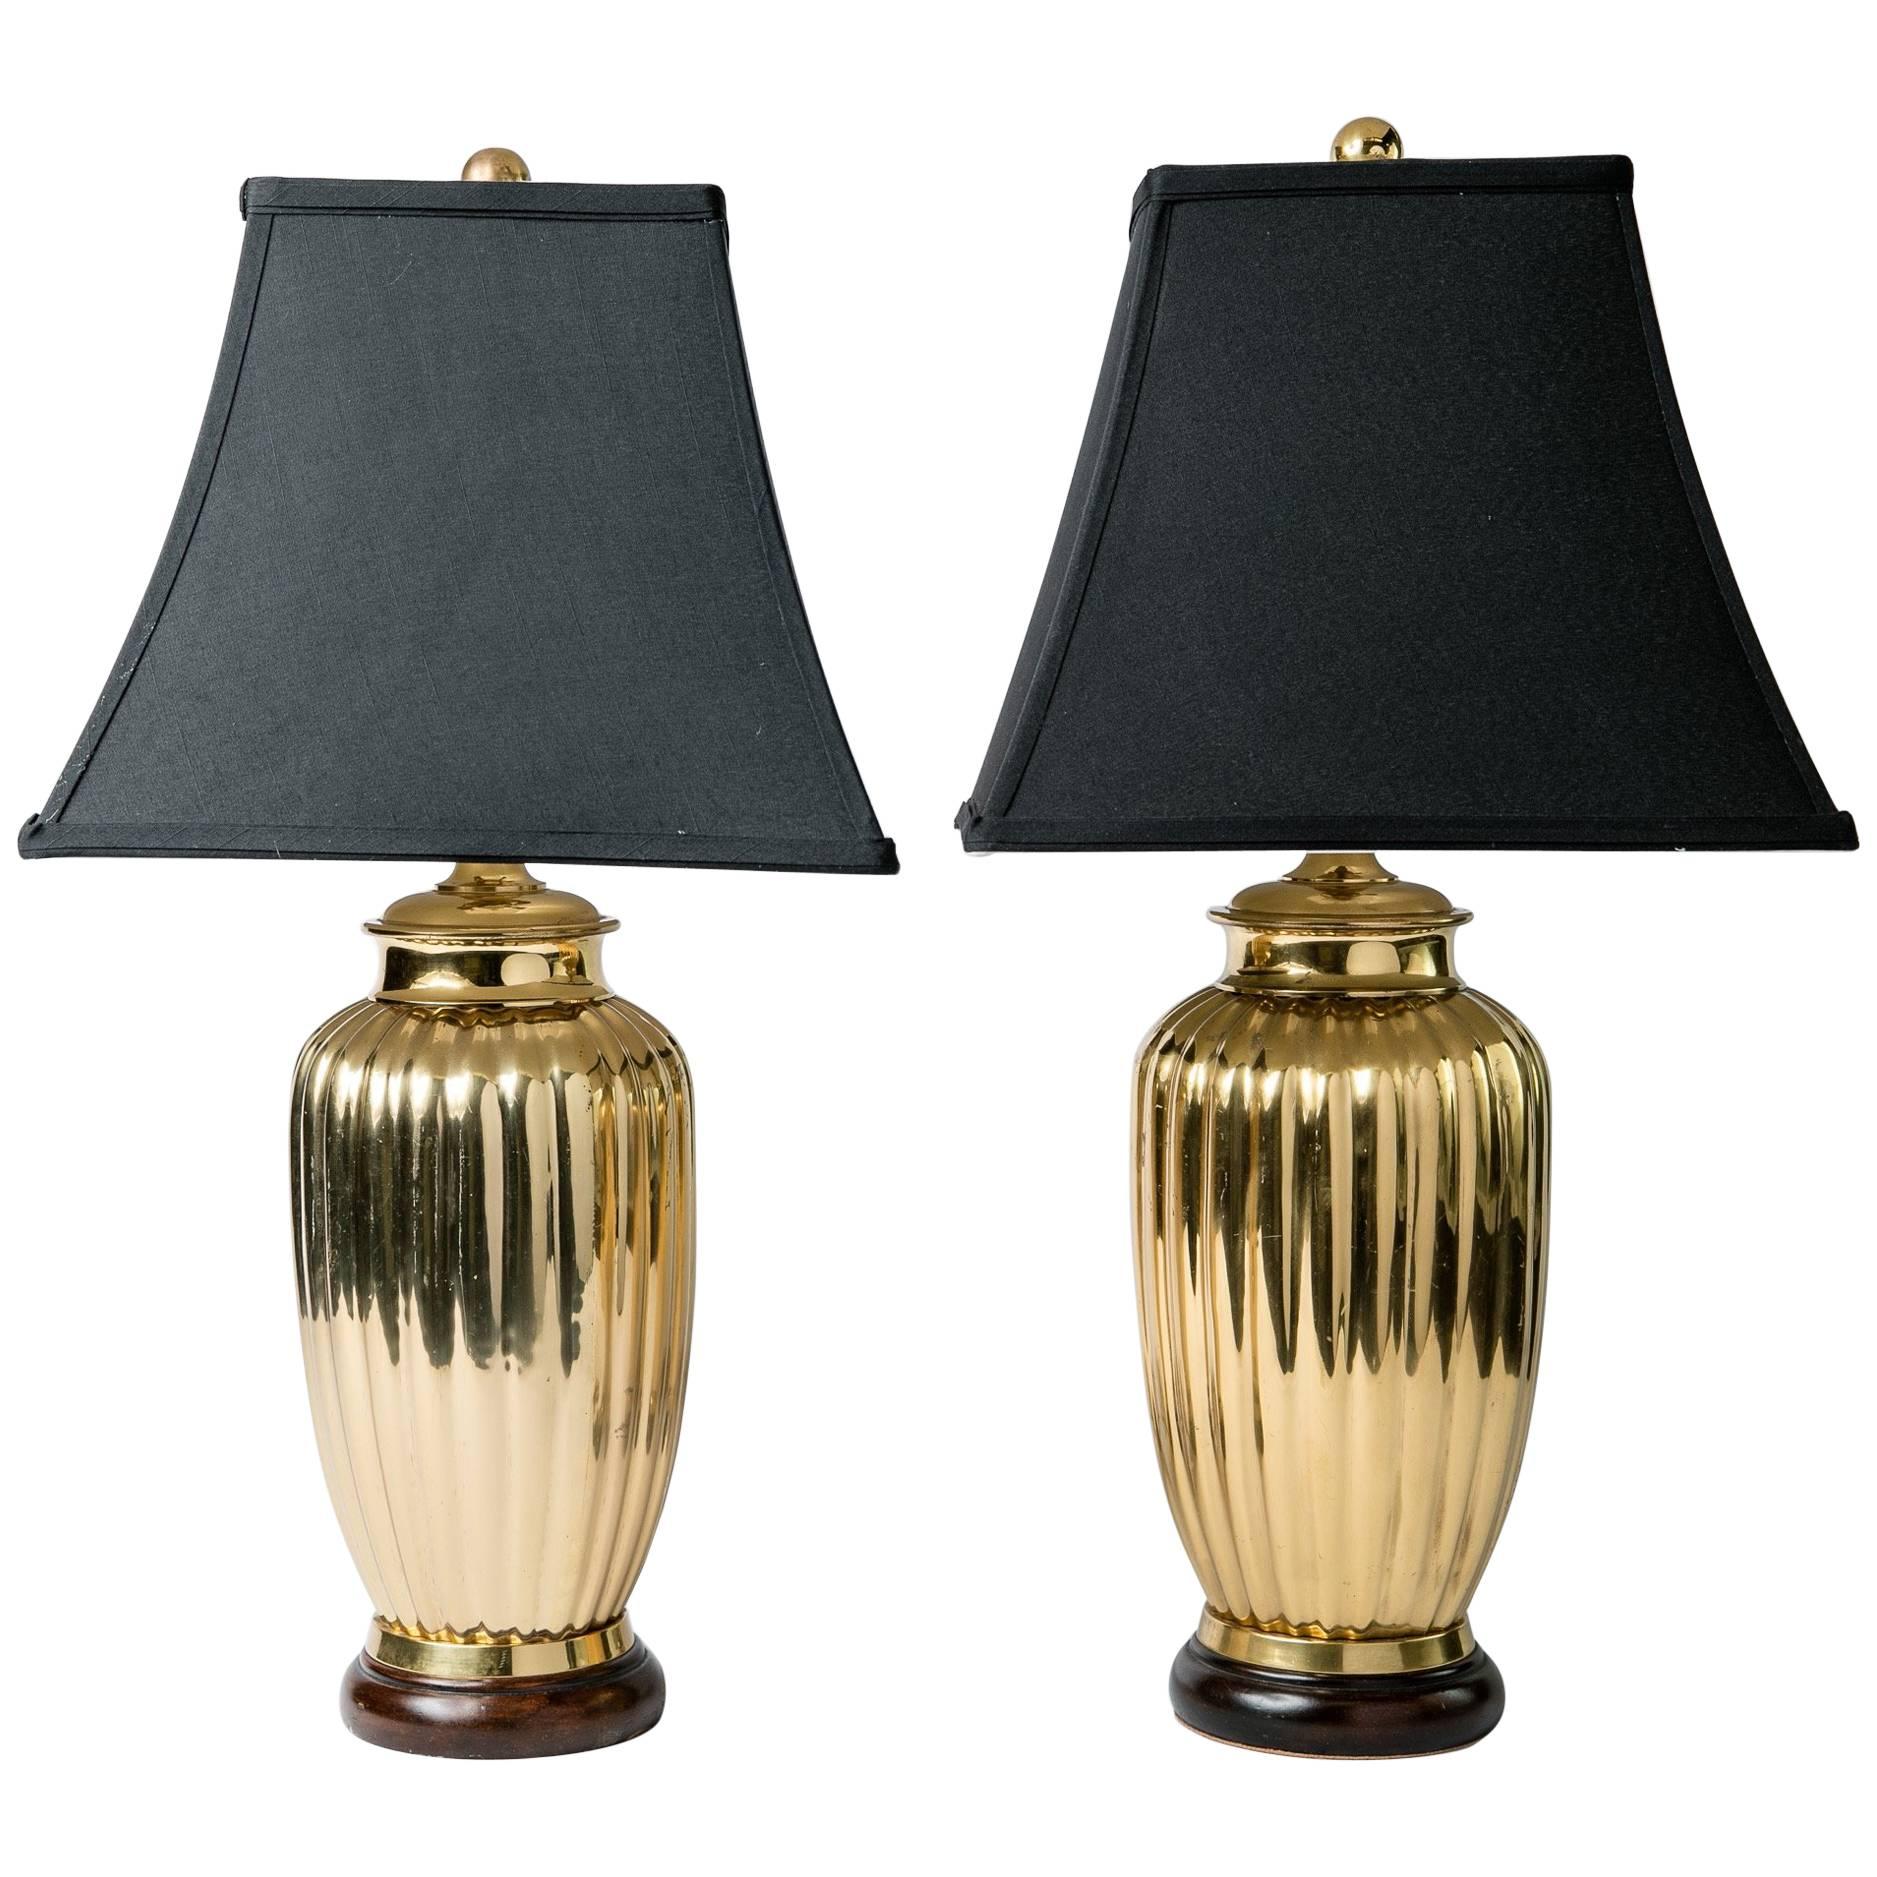 Pair of Art Deco Style Brass Table Lamps For Sale